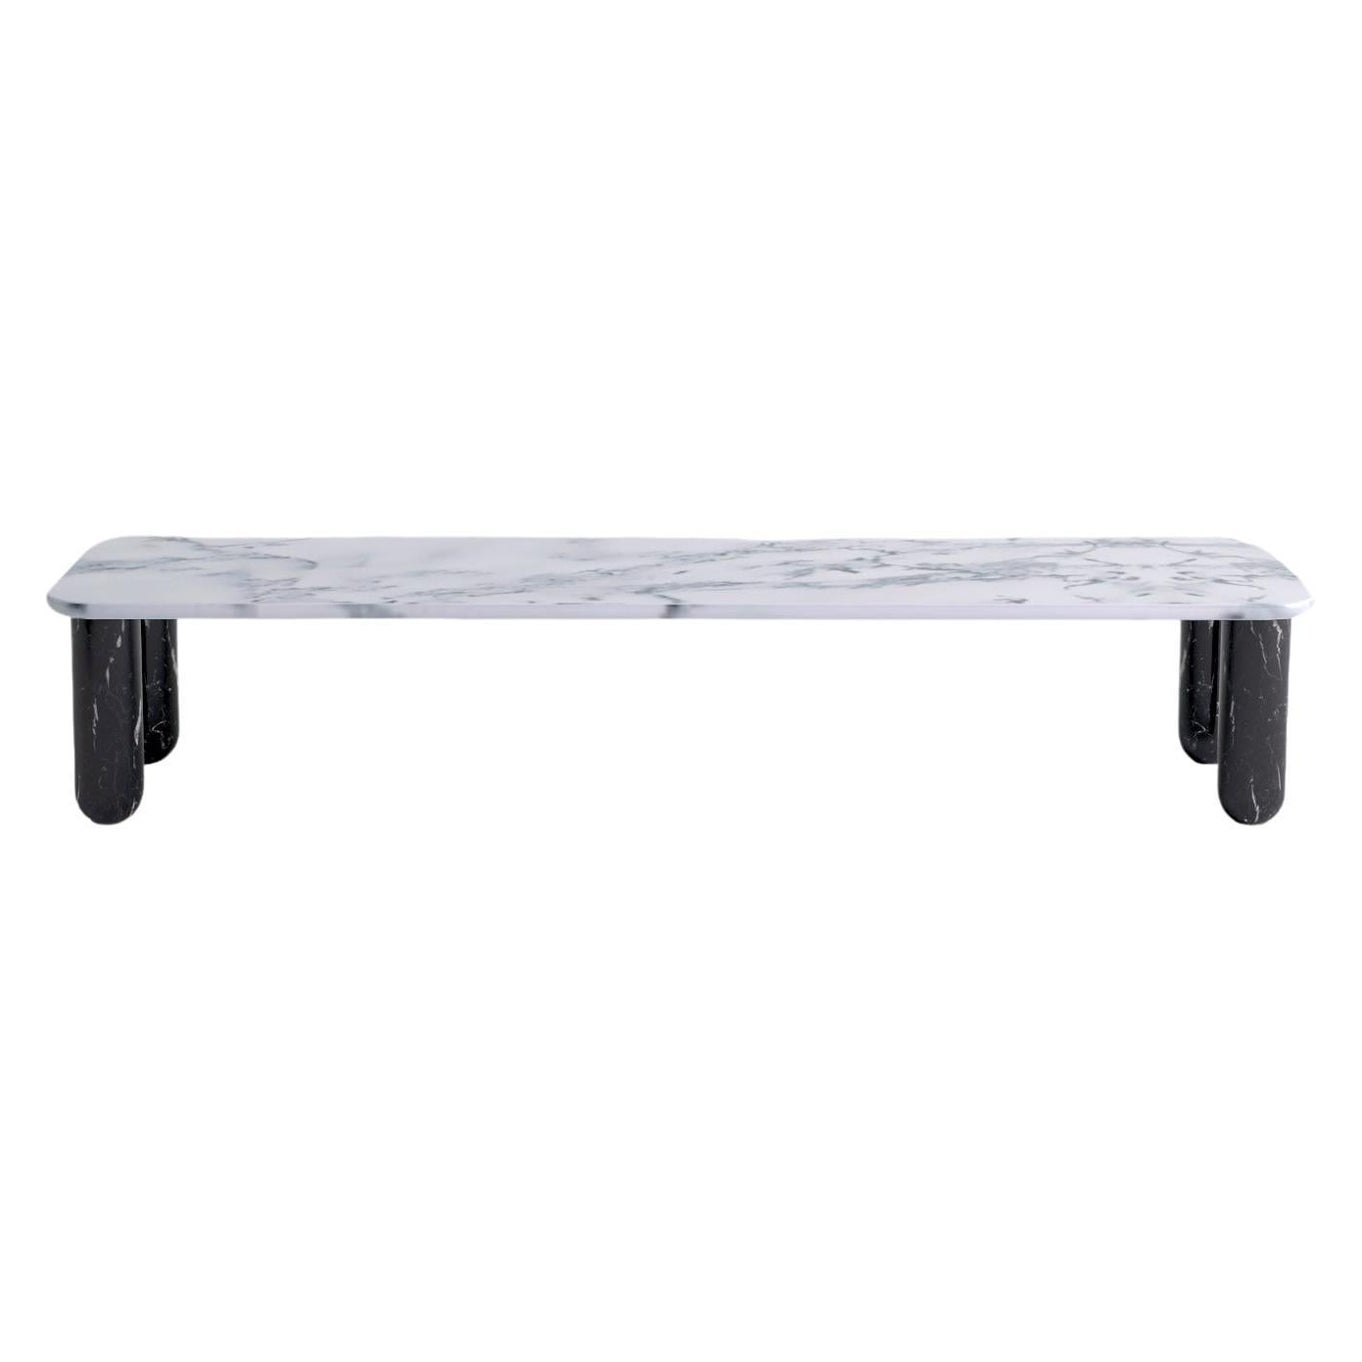 Large White and Black Marble "Sunday" Coffee Table, Jean-Baptiste Souletie For Sale